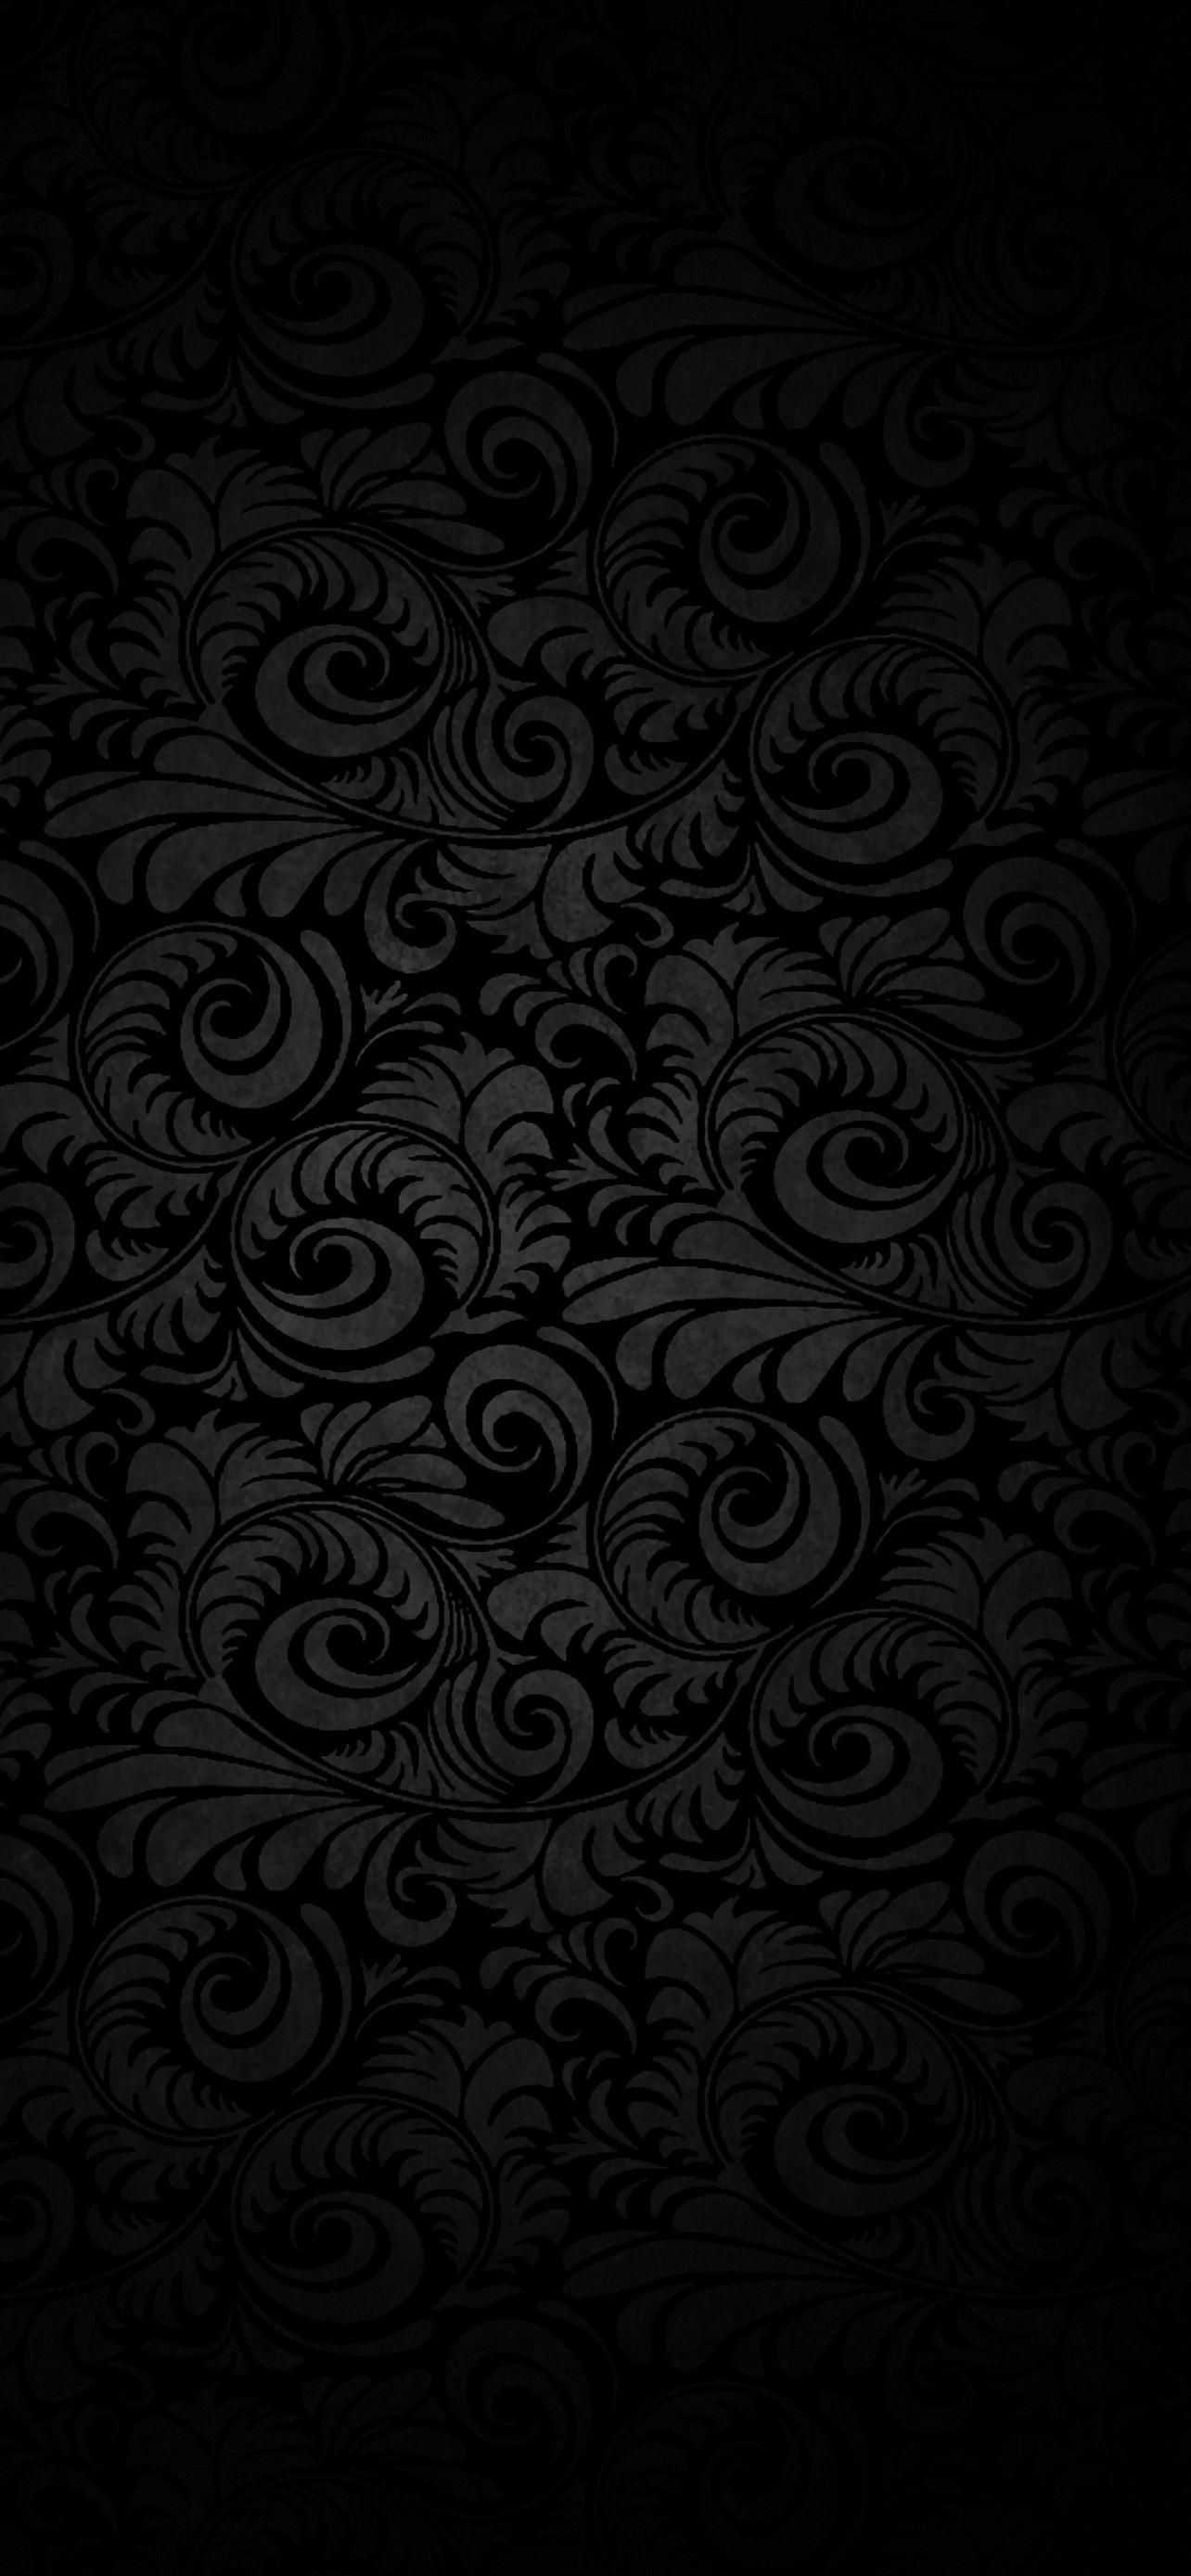 🔥 Download Dark Patterned Background iPhone Wallpaper by ...